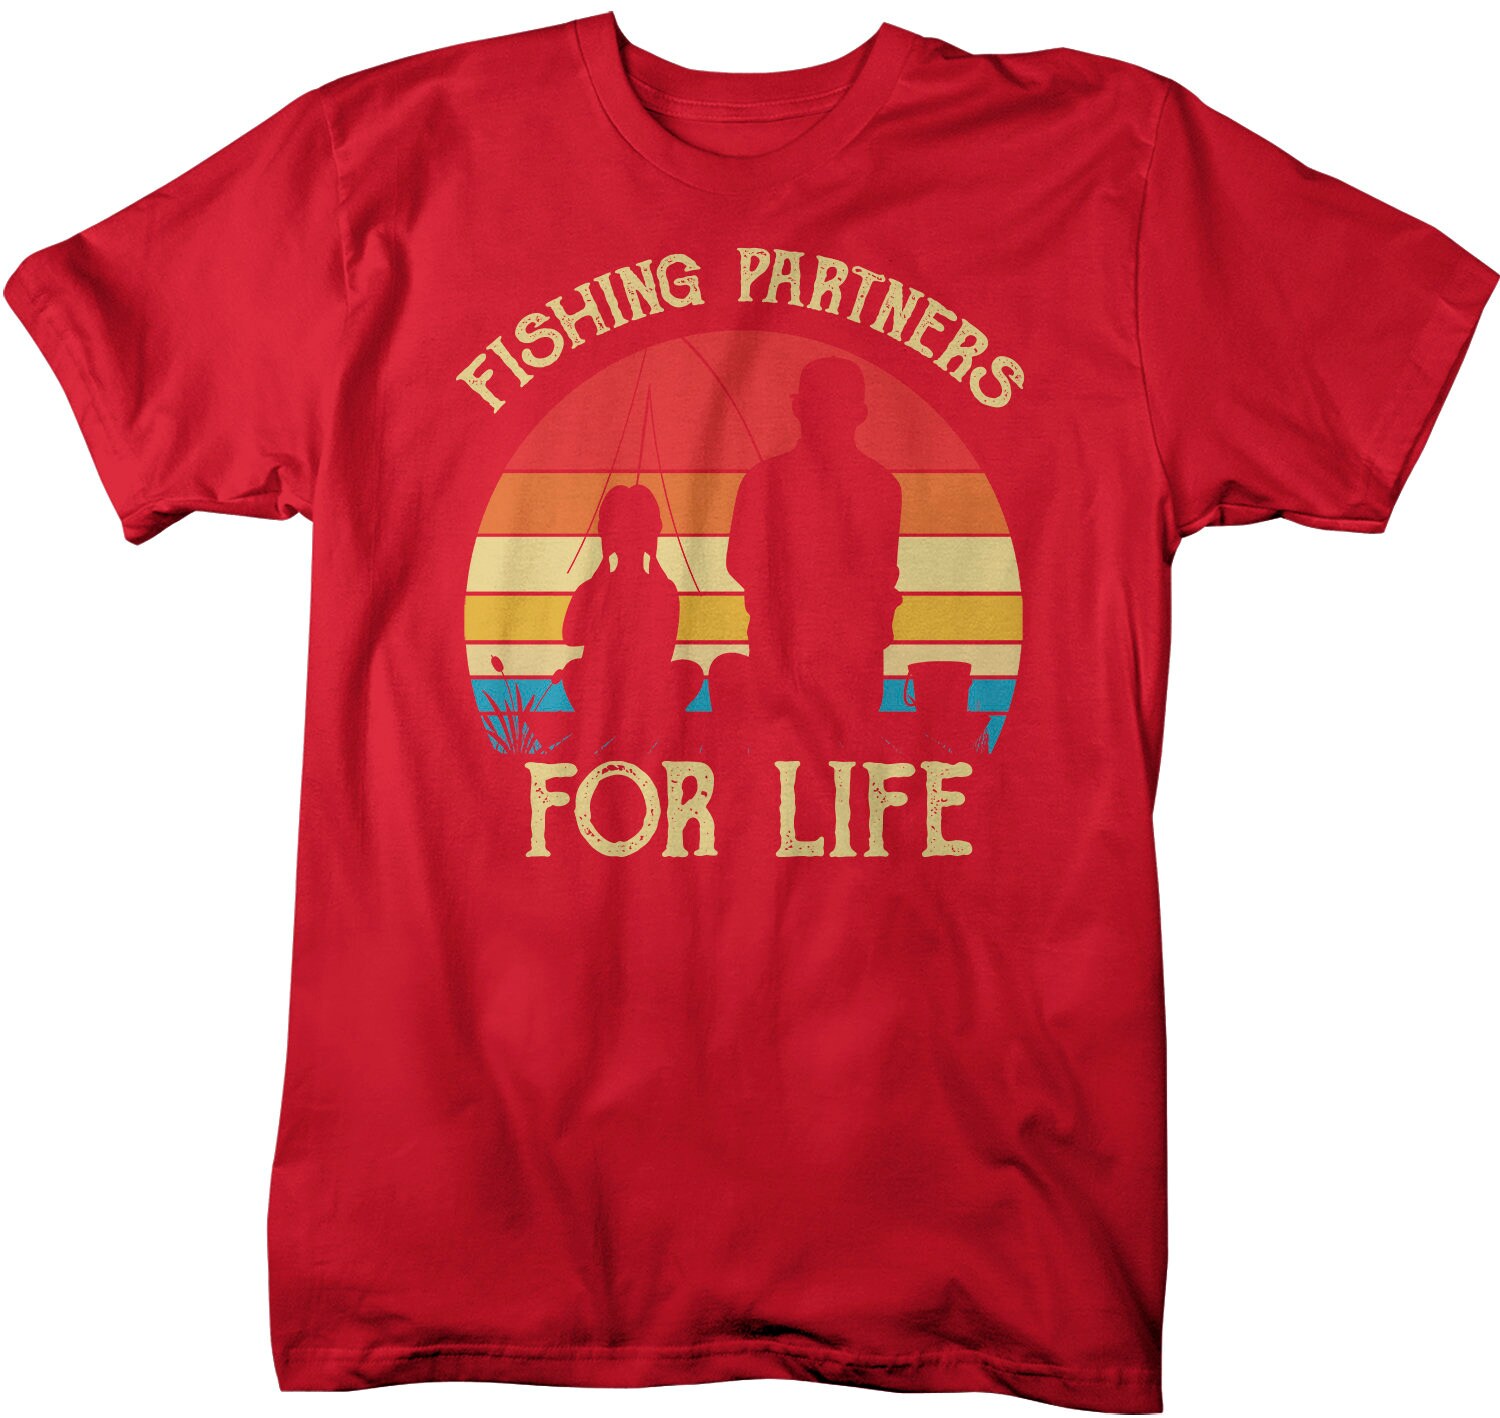 Men's Fishing T Shirts Matching Father Daughter Fishing Partners for Life  Shirts Father's Day Gift Idea Vintage Best Friends Shirt Man -  Denmark